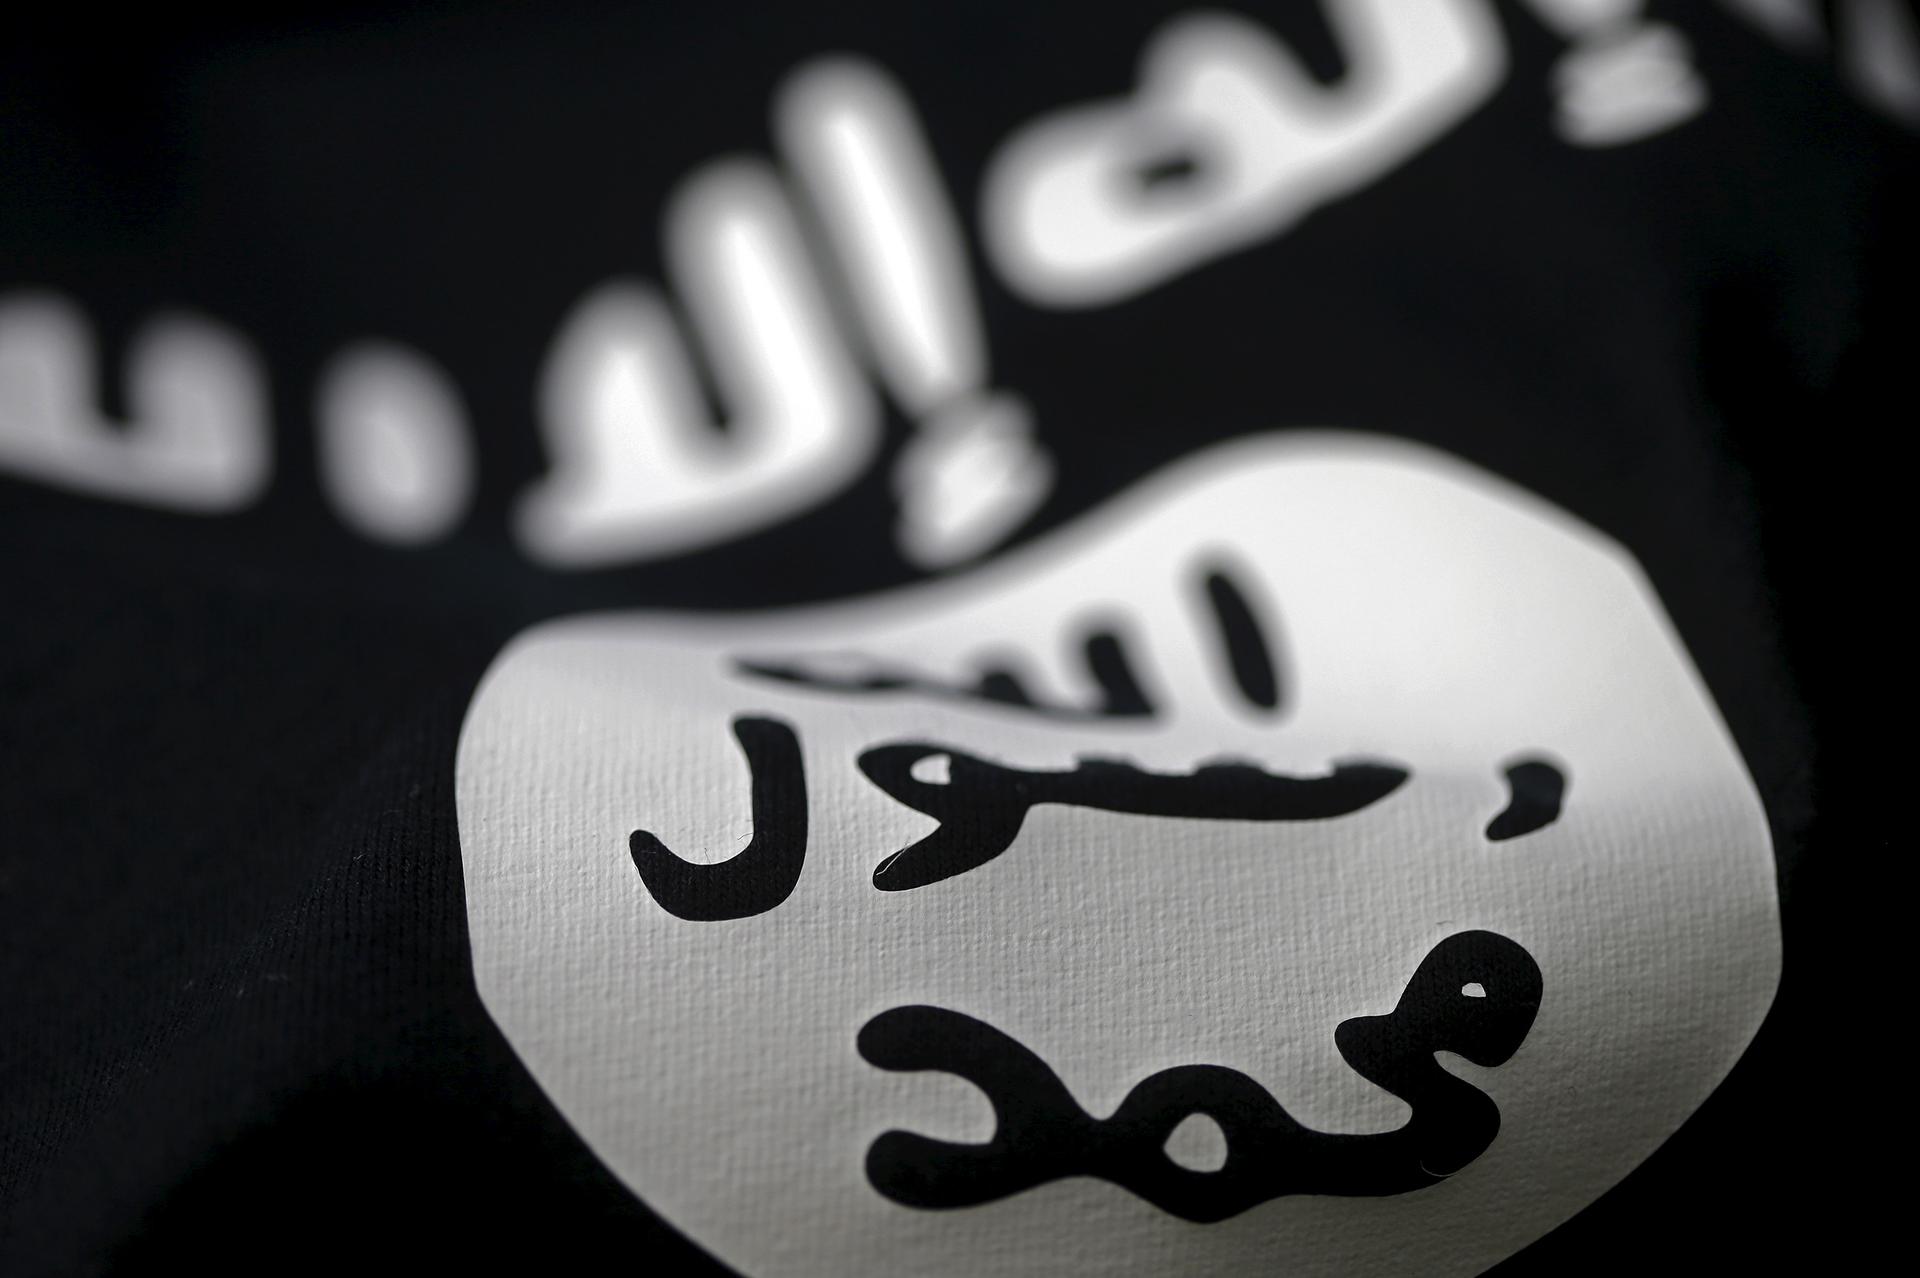 An Islamic State flag is seen in this picture illustration taken February 18, 2016.